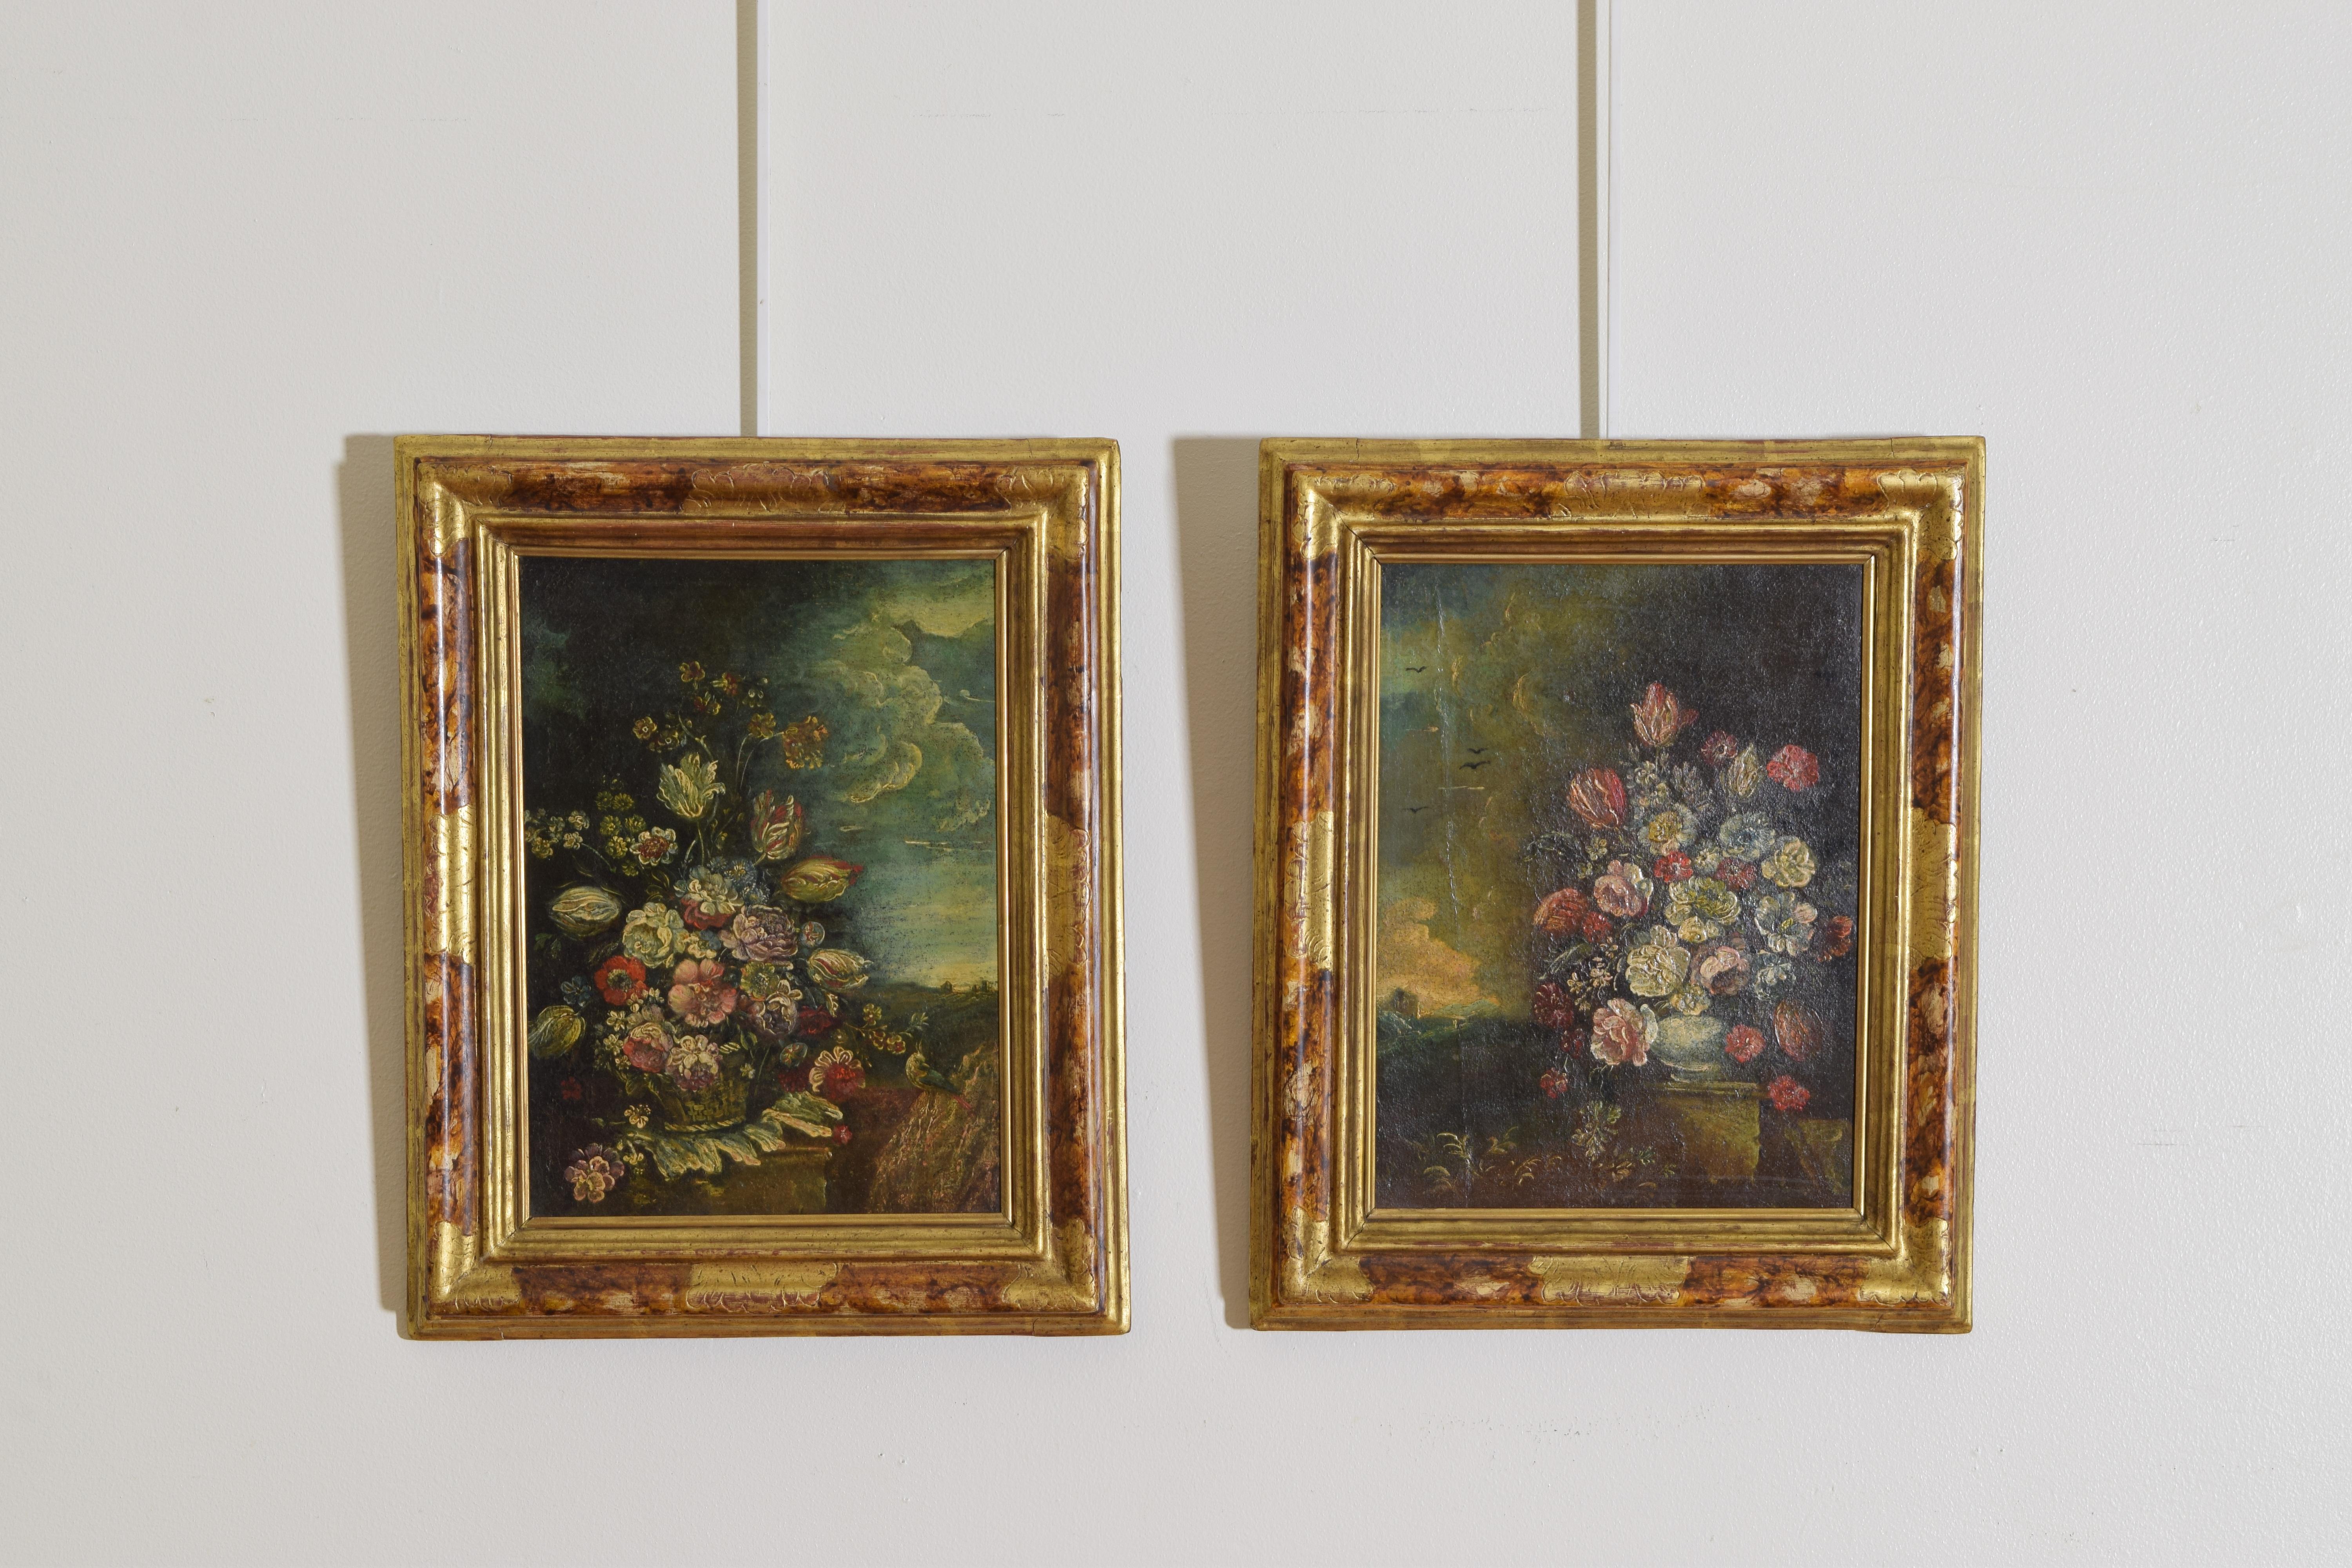 The pair of oils on canvas depicting floral arrangements, one in a basket, the other in a pot, both on plinths, each with dwellings and mountains in the distance, one with a bird in the foreground, the other with birds in the air, both with cloud